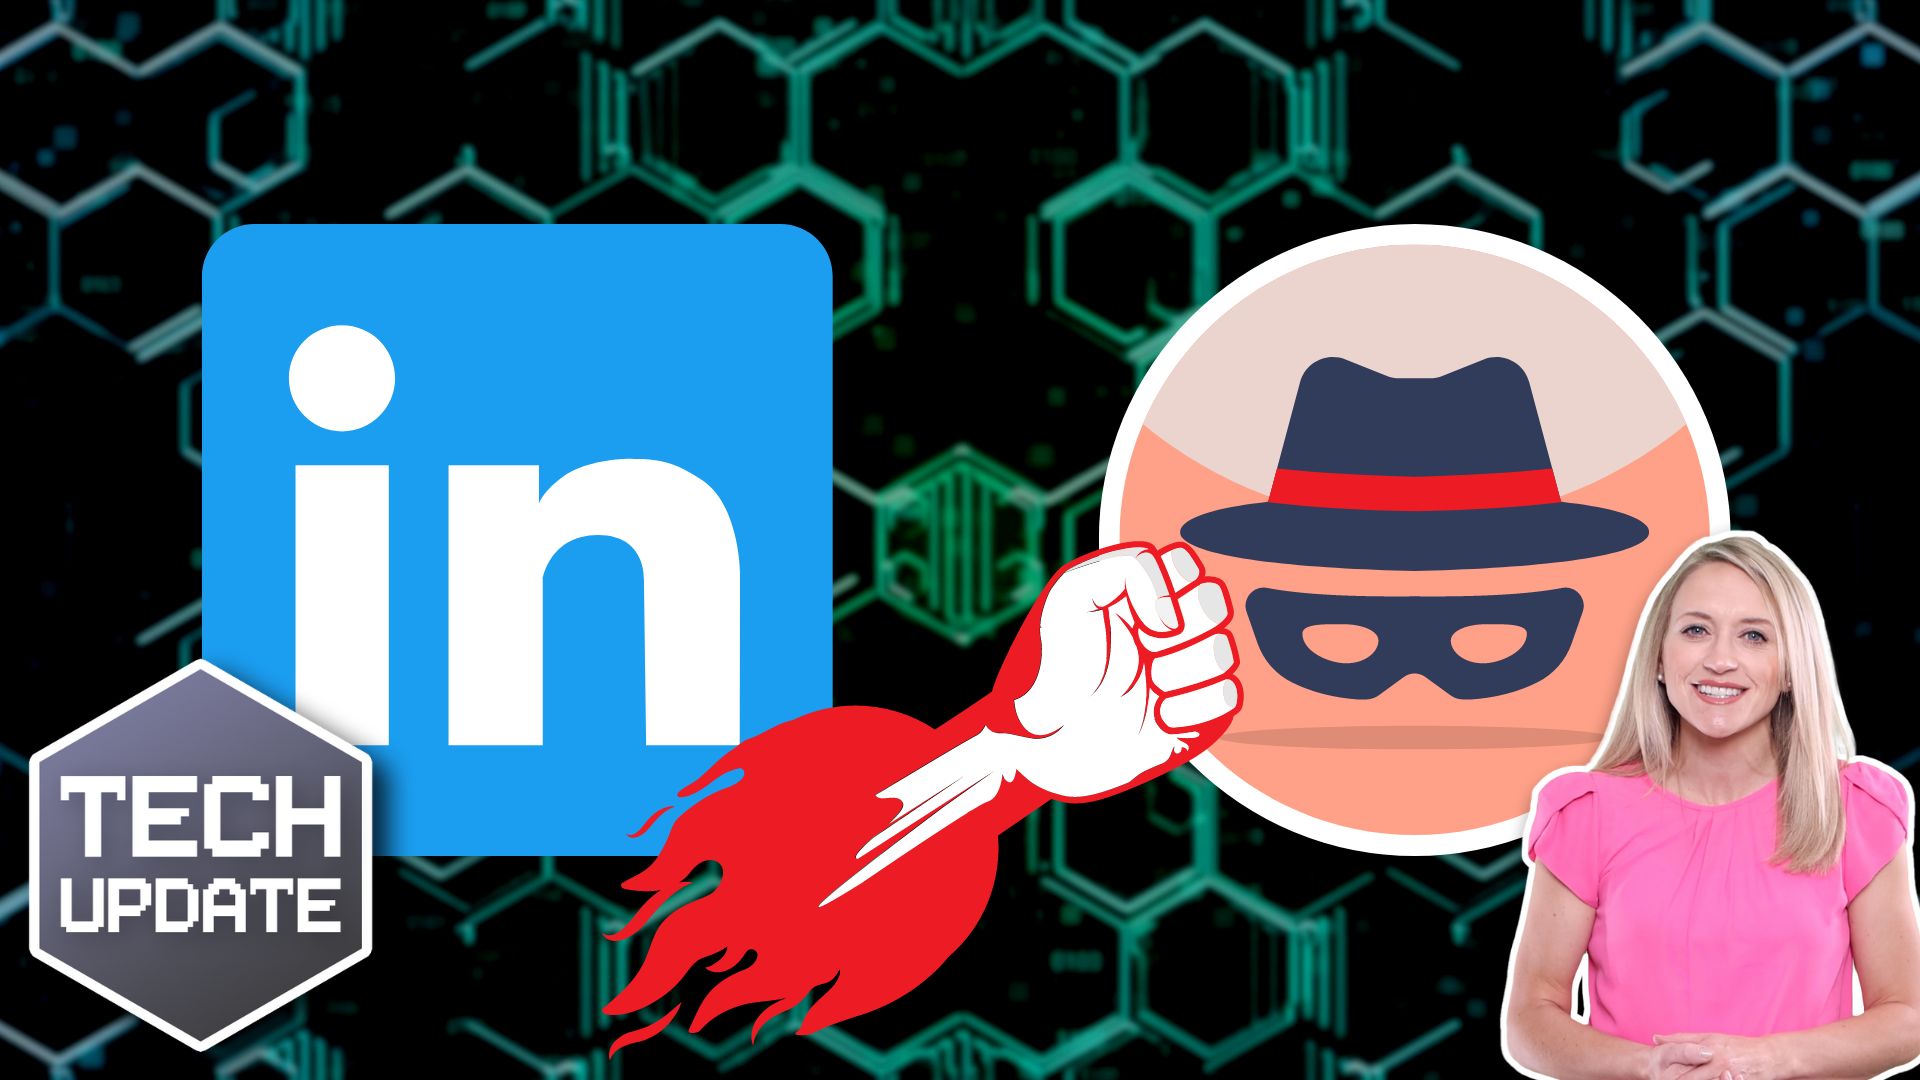 Responza IT management, consulting, support and LinkedIn's action to tackle fake LinkedIn accounts